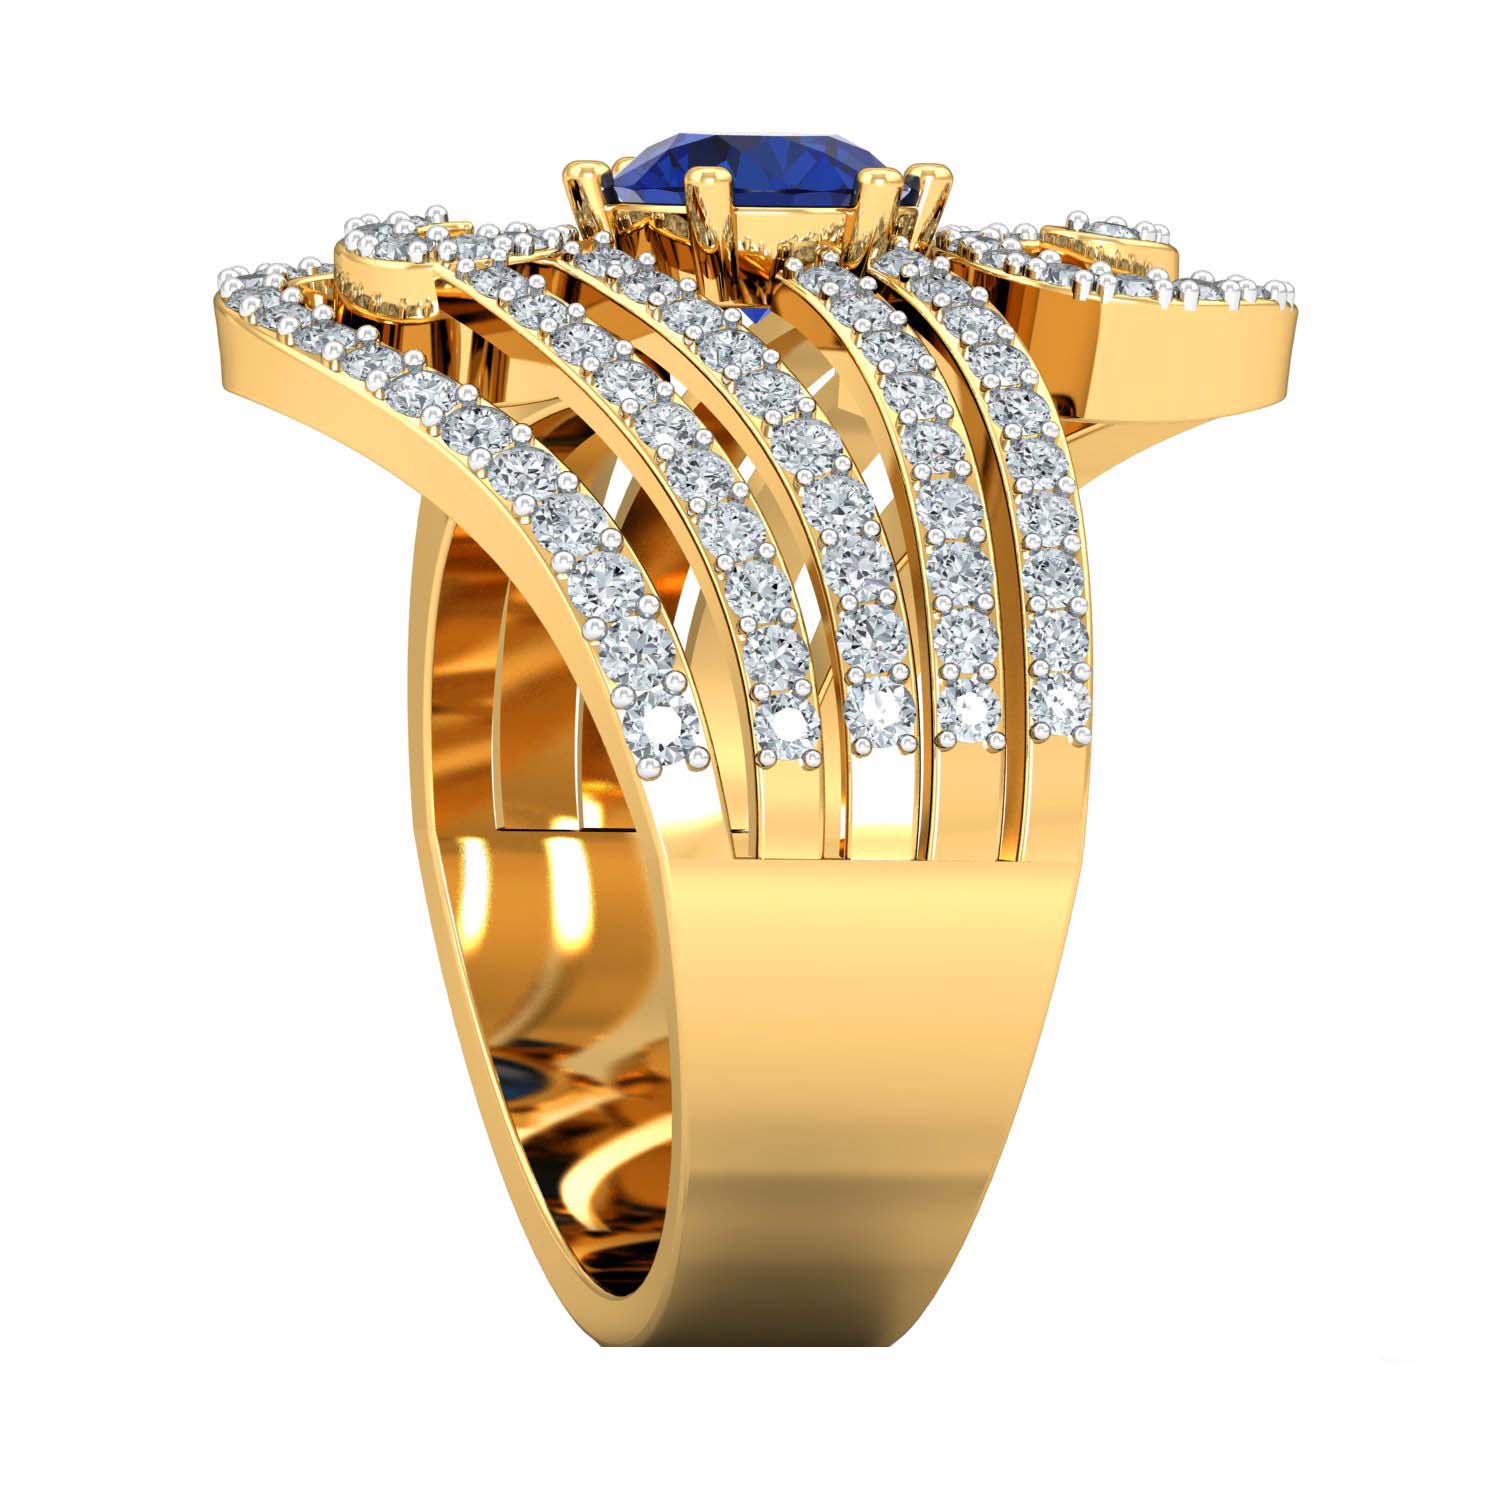 1 Gram Gold Forming Blue Stone With Diamond Funky Design Ring For Men -  Style A788 at Rs 1470.00 | Rajkot| ID: 2849245905062